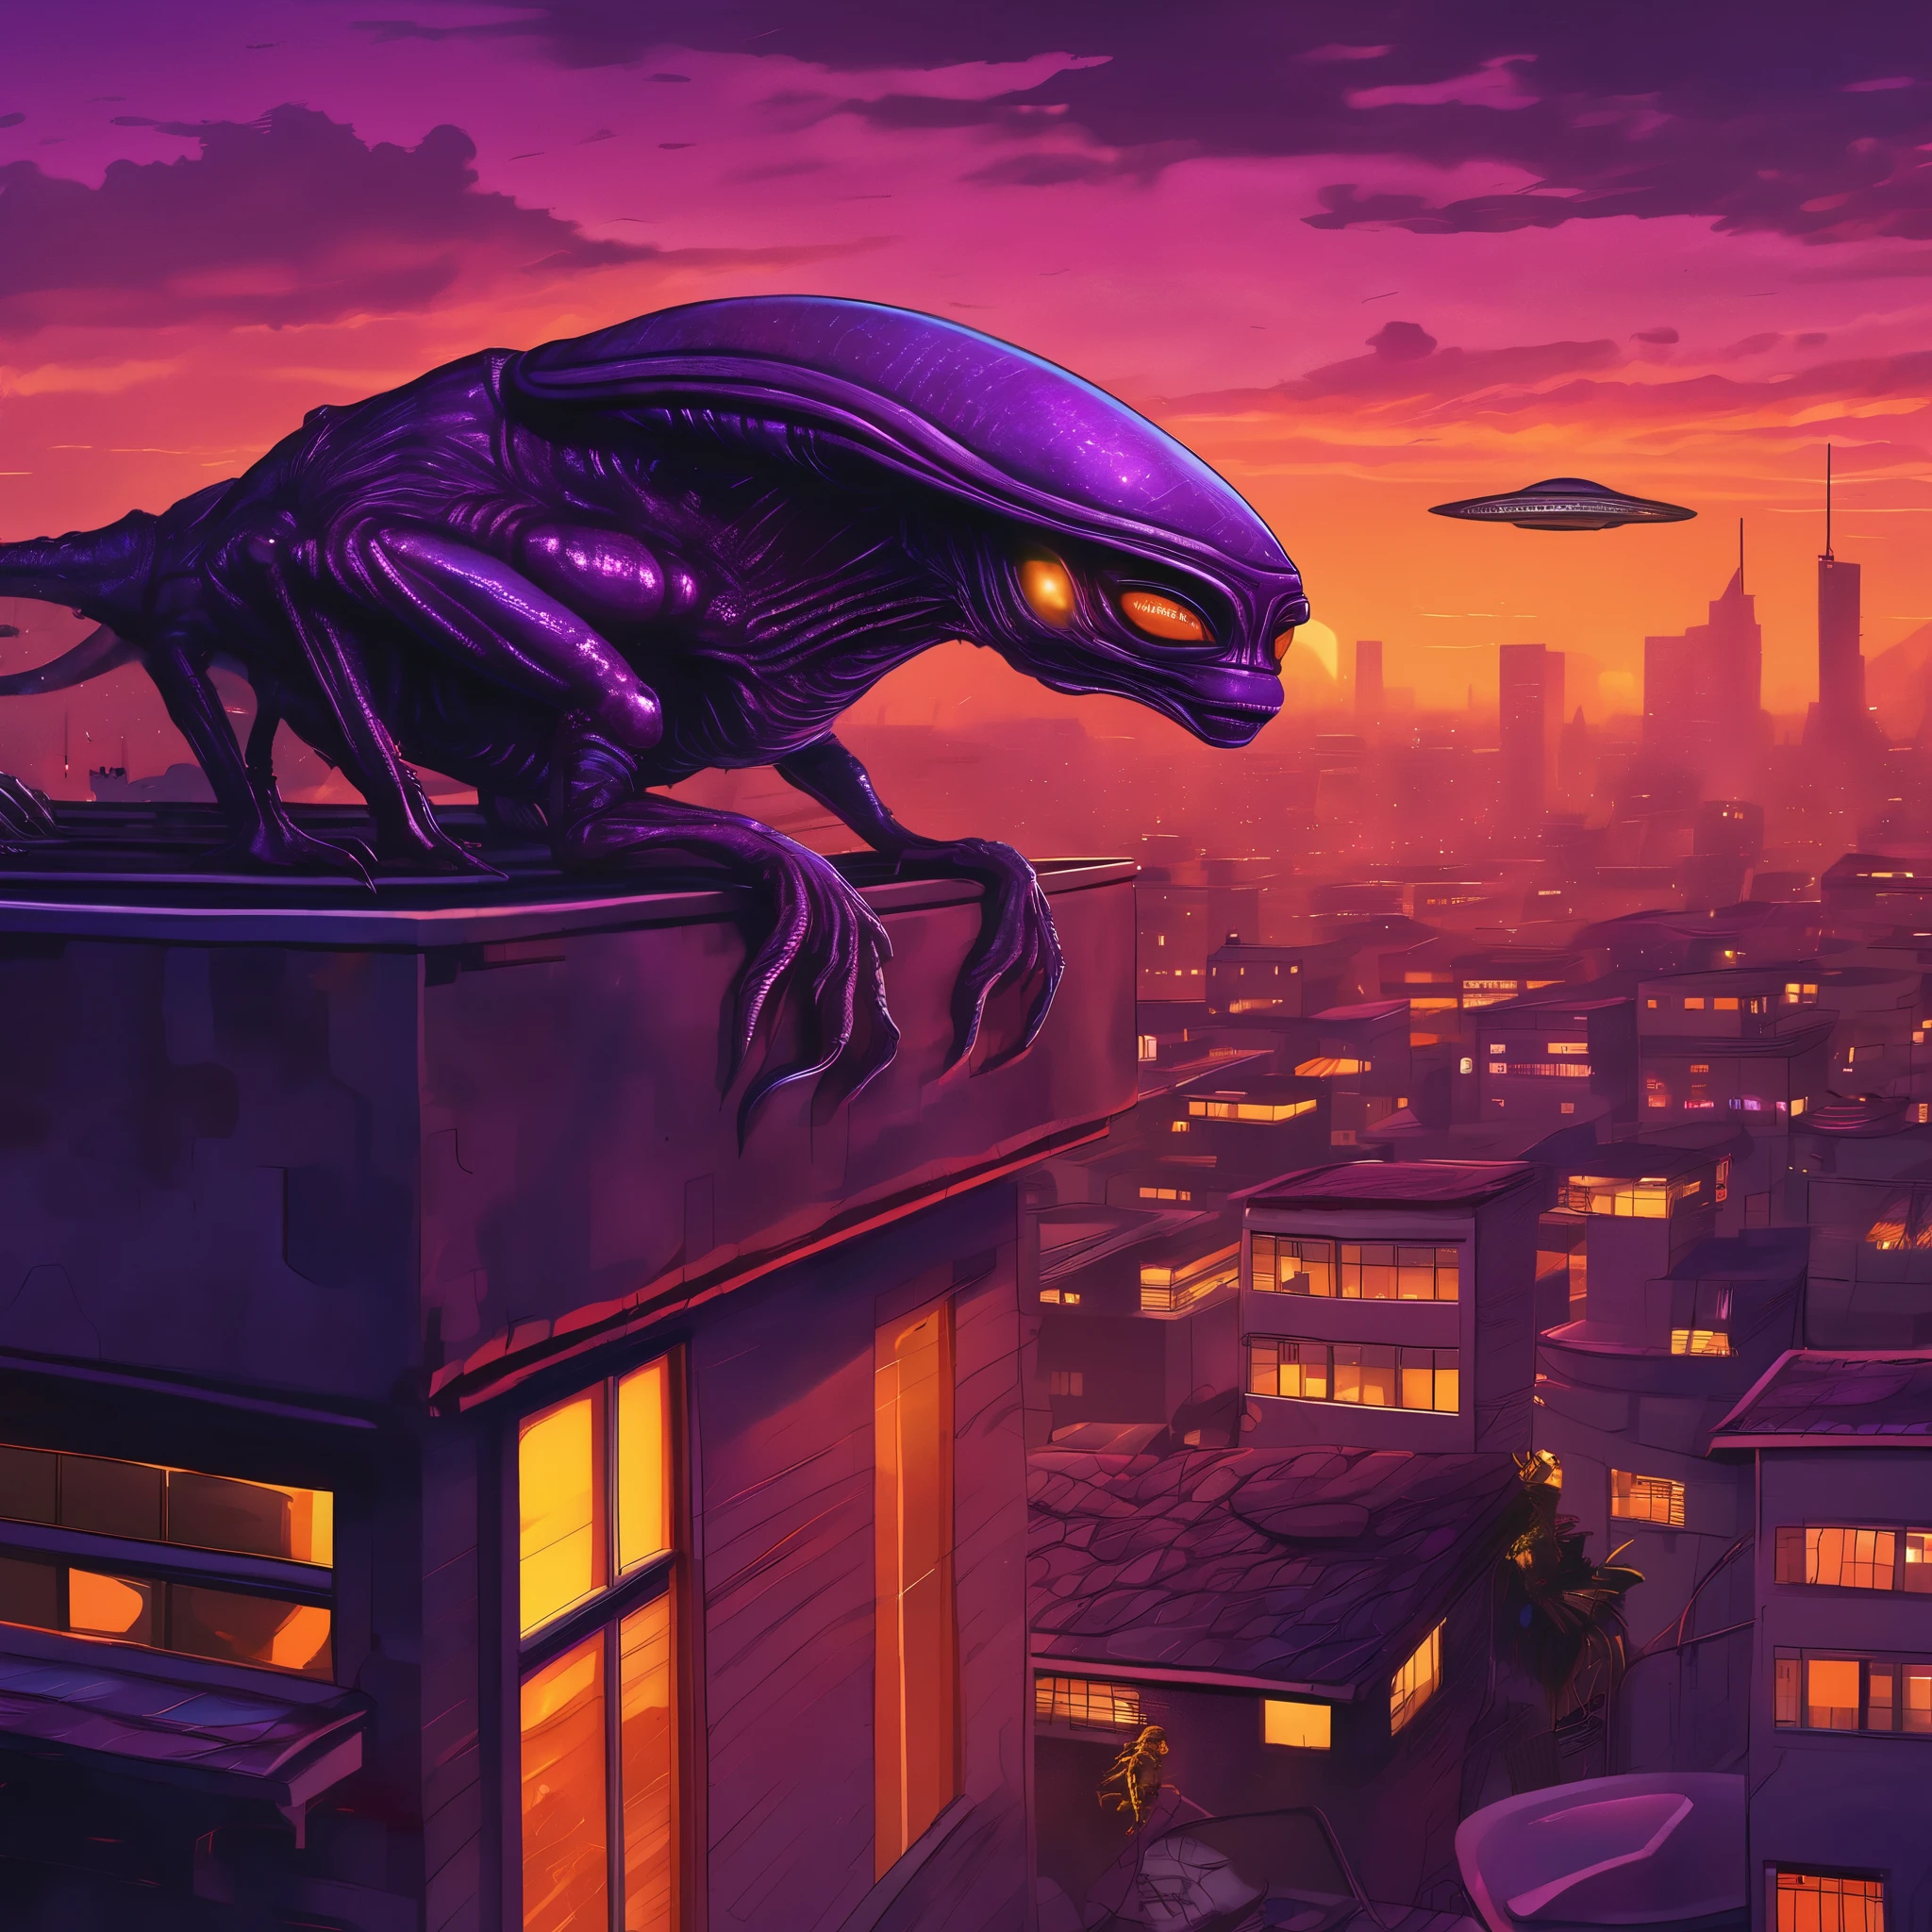 Alien creatures hiding on rooftops at sunset,separated from their spaceship,avoiding search parties,illustrated,highres,(realistic:1.37),mysterious dark shadows,camouflaged scales,glowing eyes,sharp claws,tense body language,urban landscape,sci-fi concept artists,orange and purple color palette,dramatic lighting